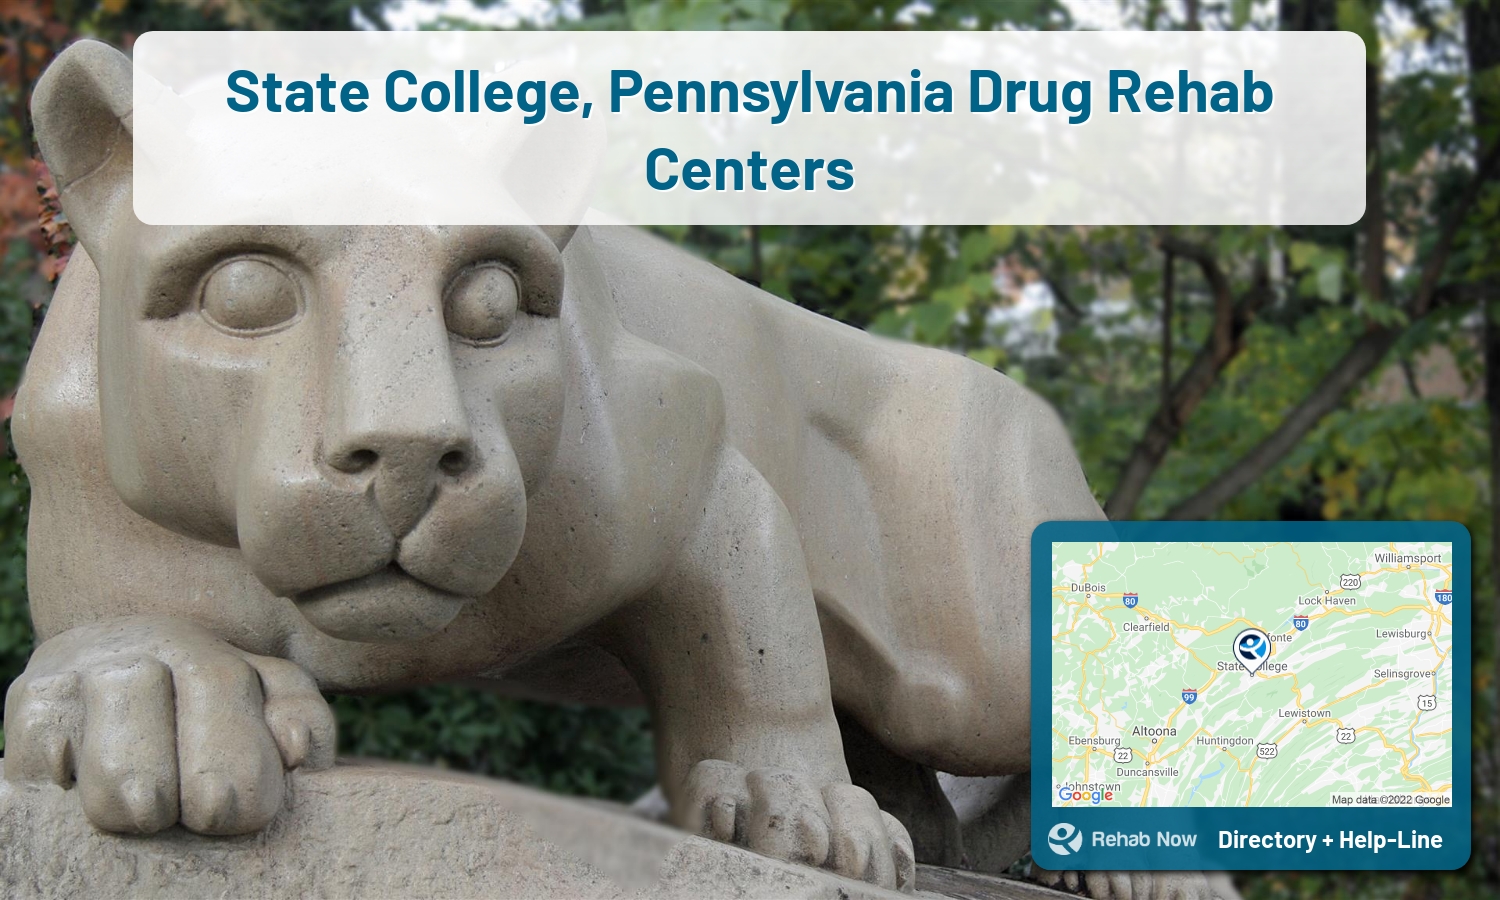 View options, availability, treatment methods, and more, for drug rehab and alcohol treatment in State College, Pennsylvania